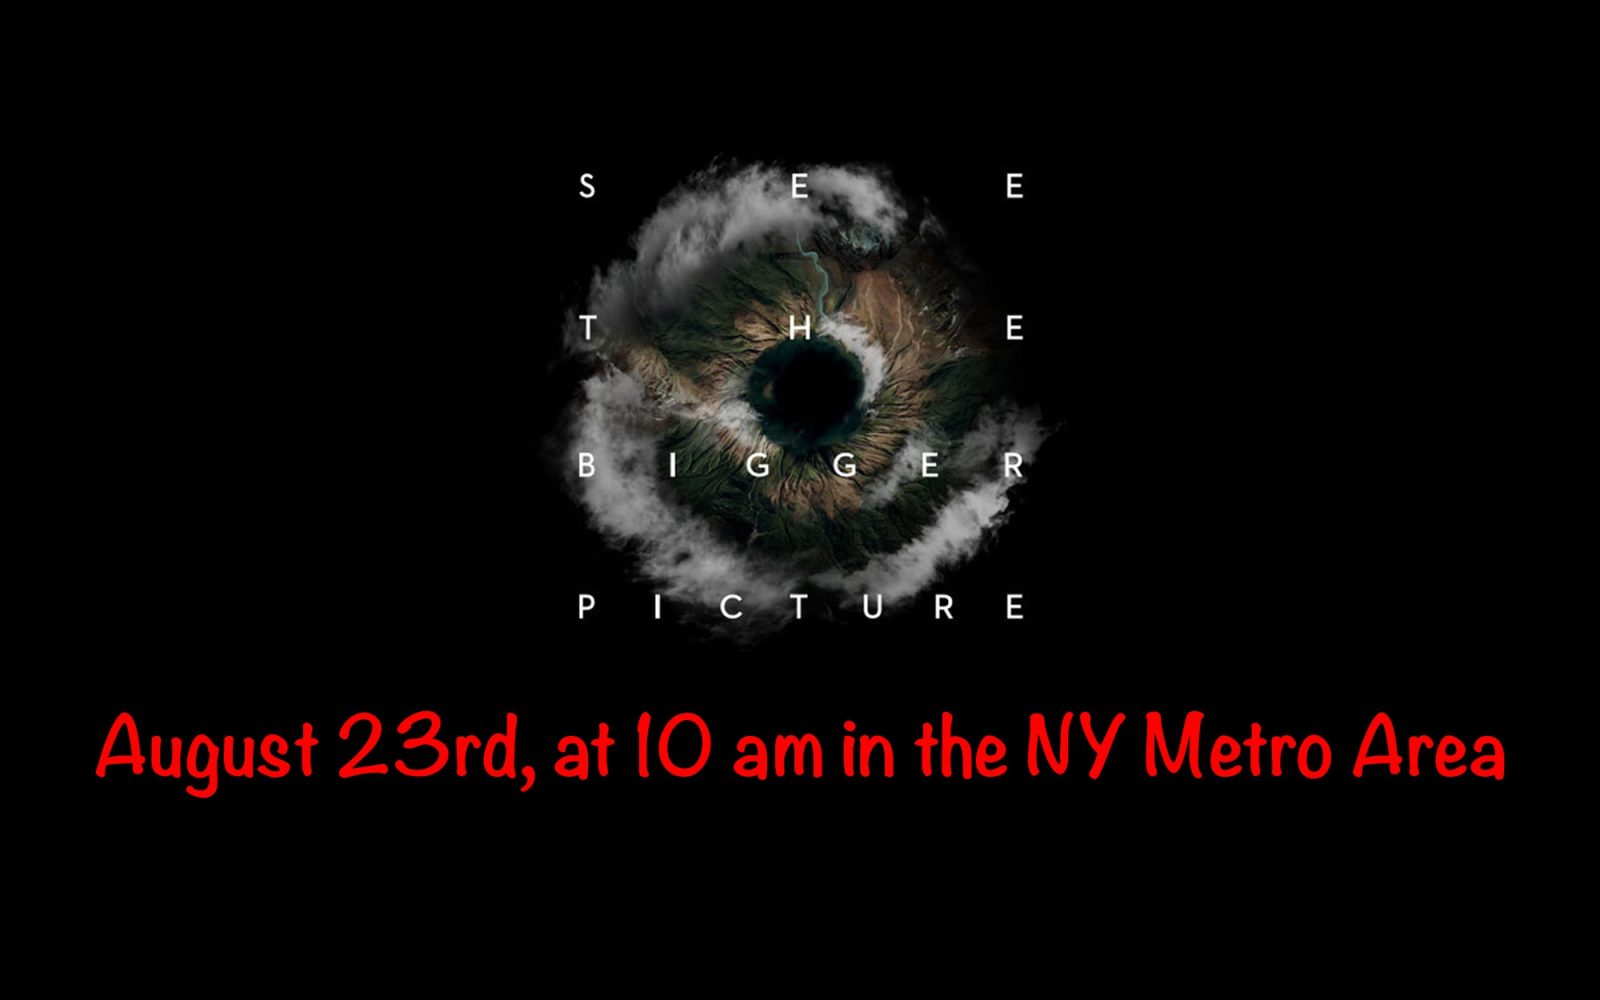 DJI announces rescheduled "See the Bigger Picture" event for August 23rd at 10am in the NY Metro area